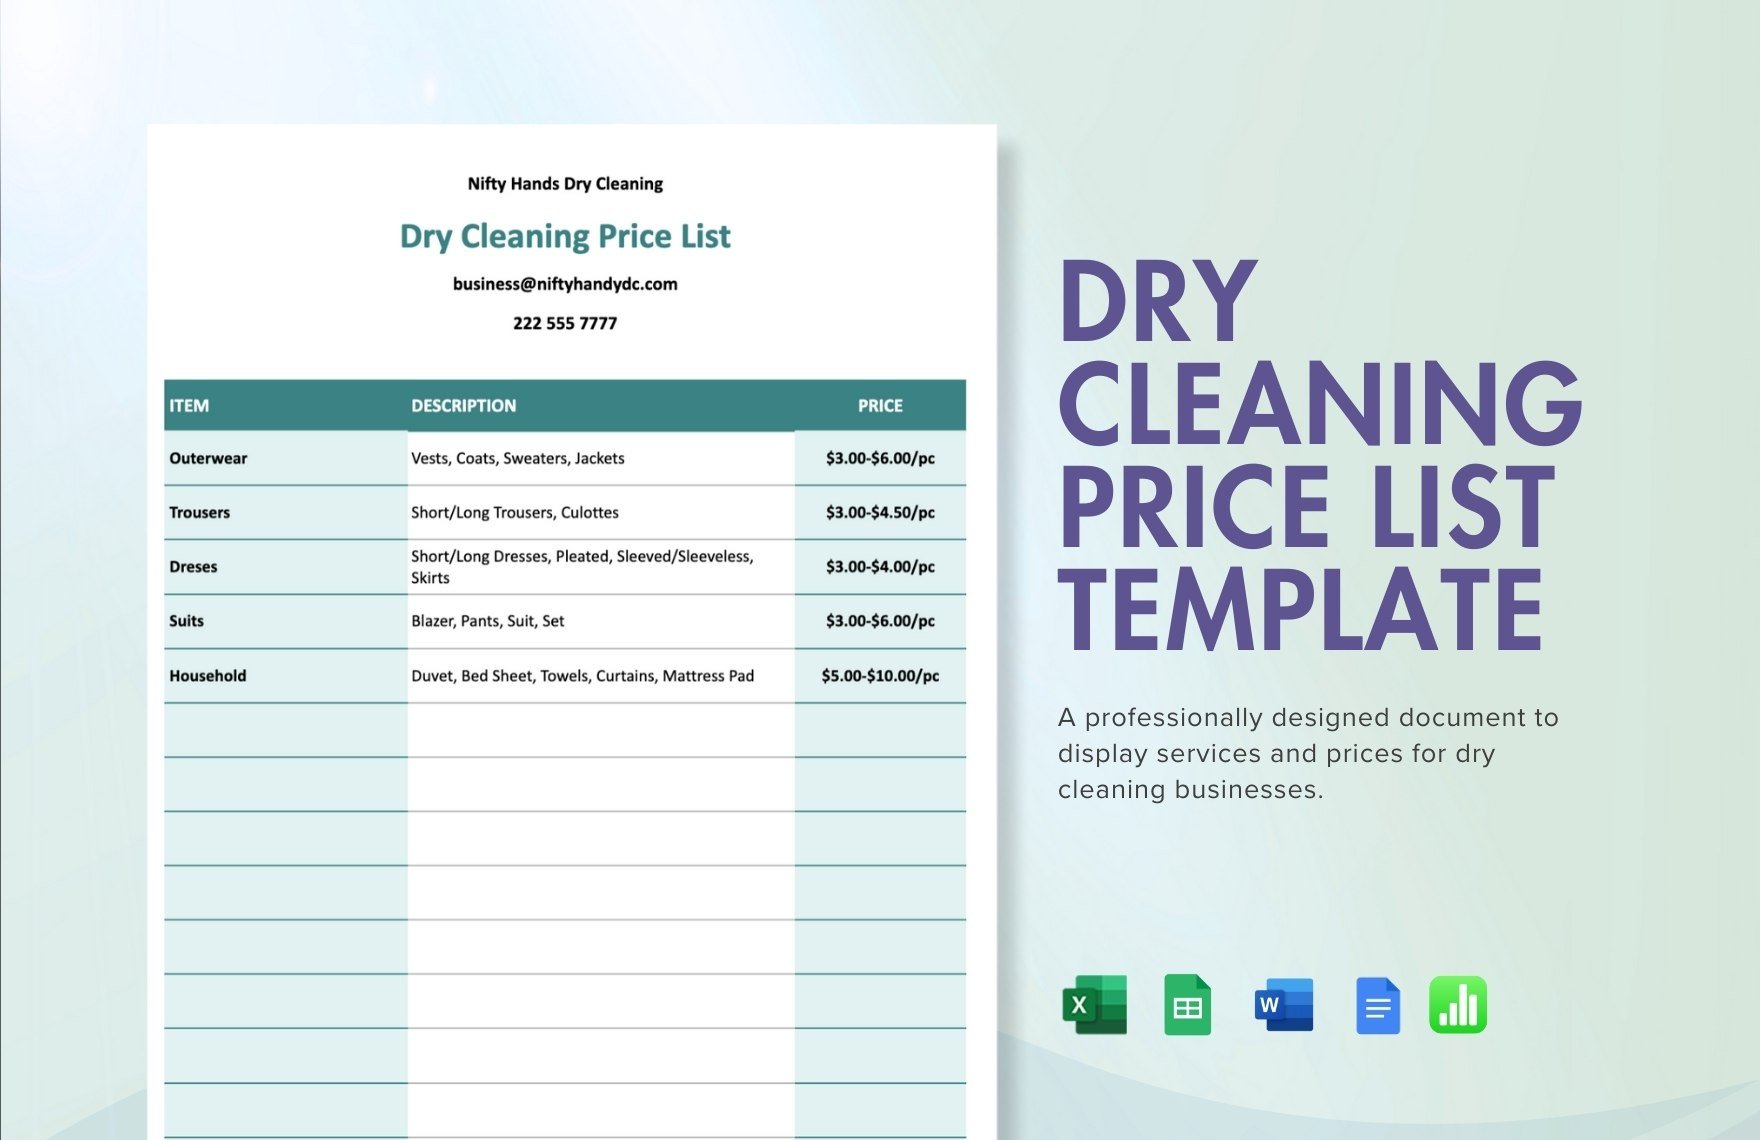 Dry Cleaning Price List Template in Word, Google Docs, Excel, Google Sheets, Apple Numbers